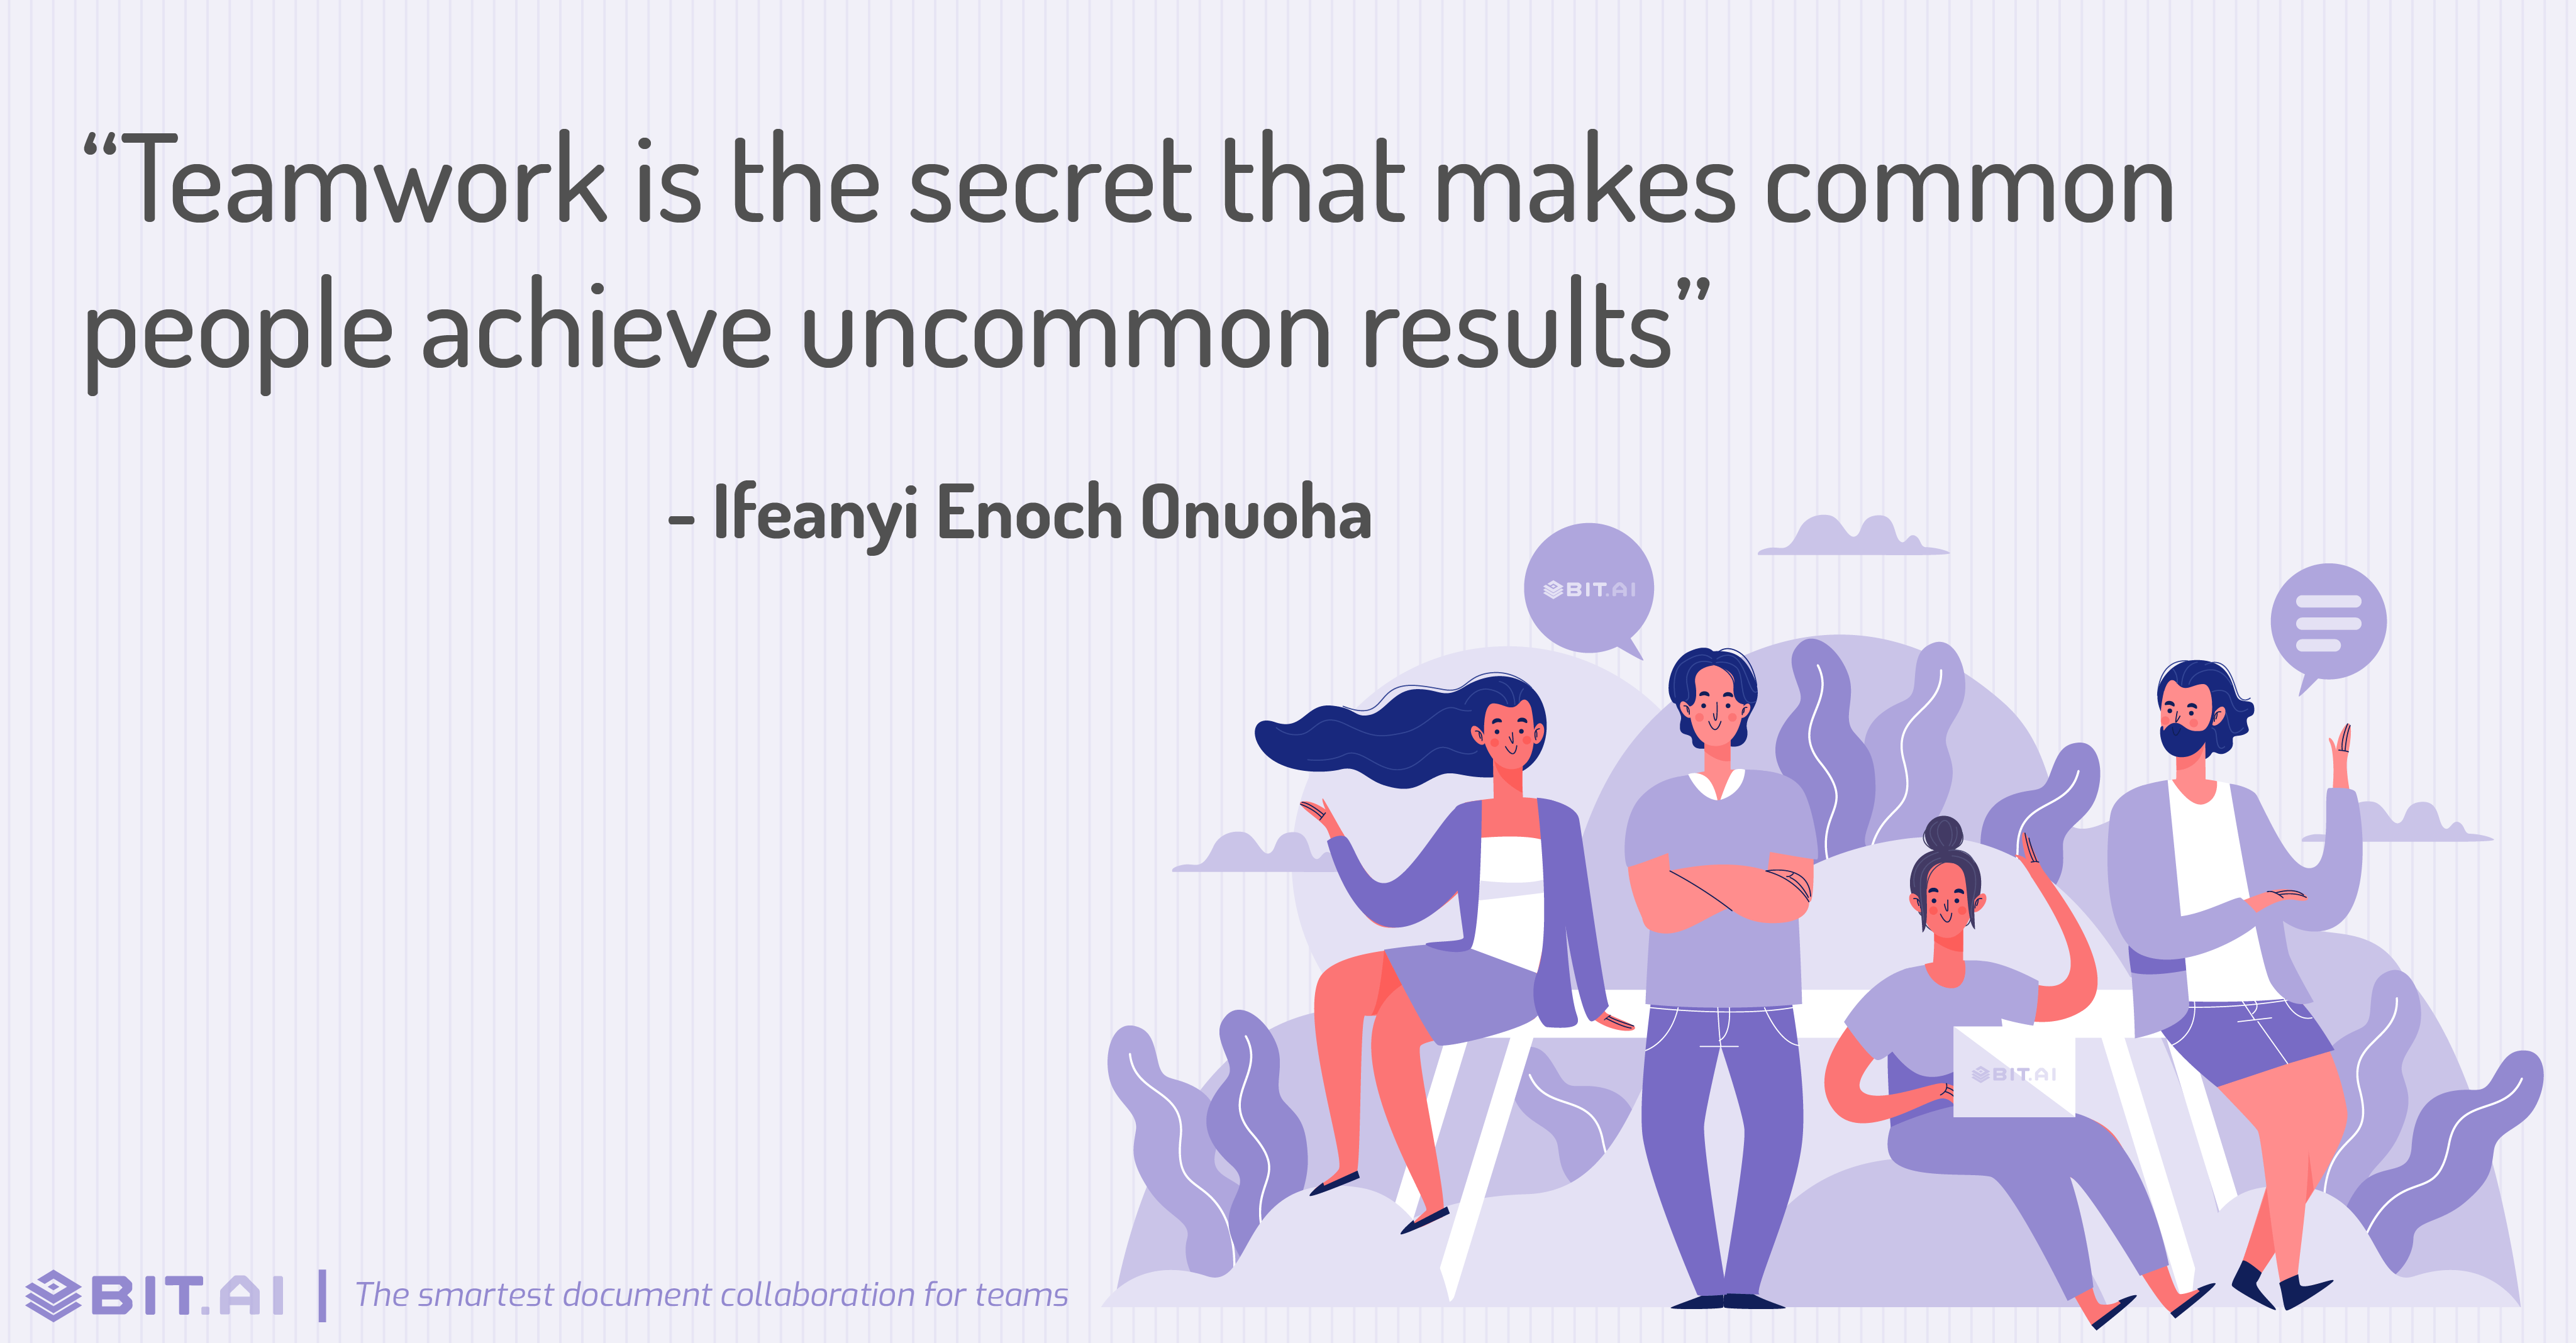 teamwork is the secret that makes common people achieve uncommon results. ifeanyi enoch onuoha